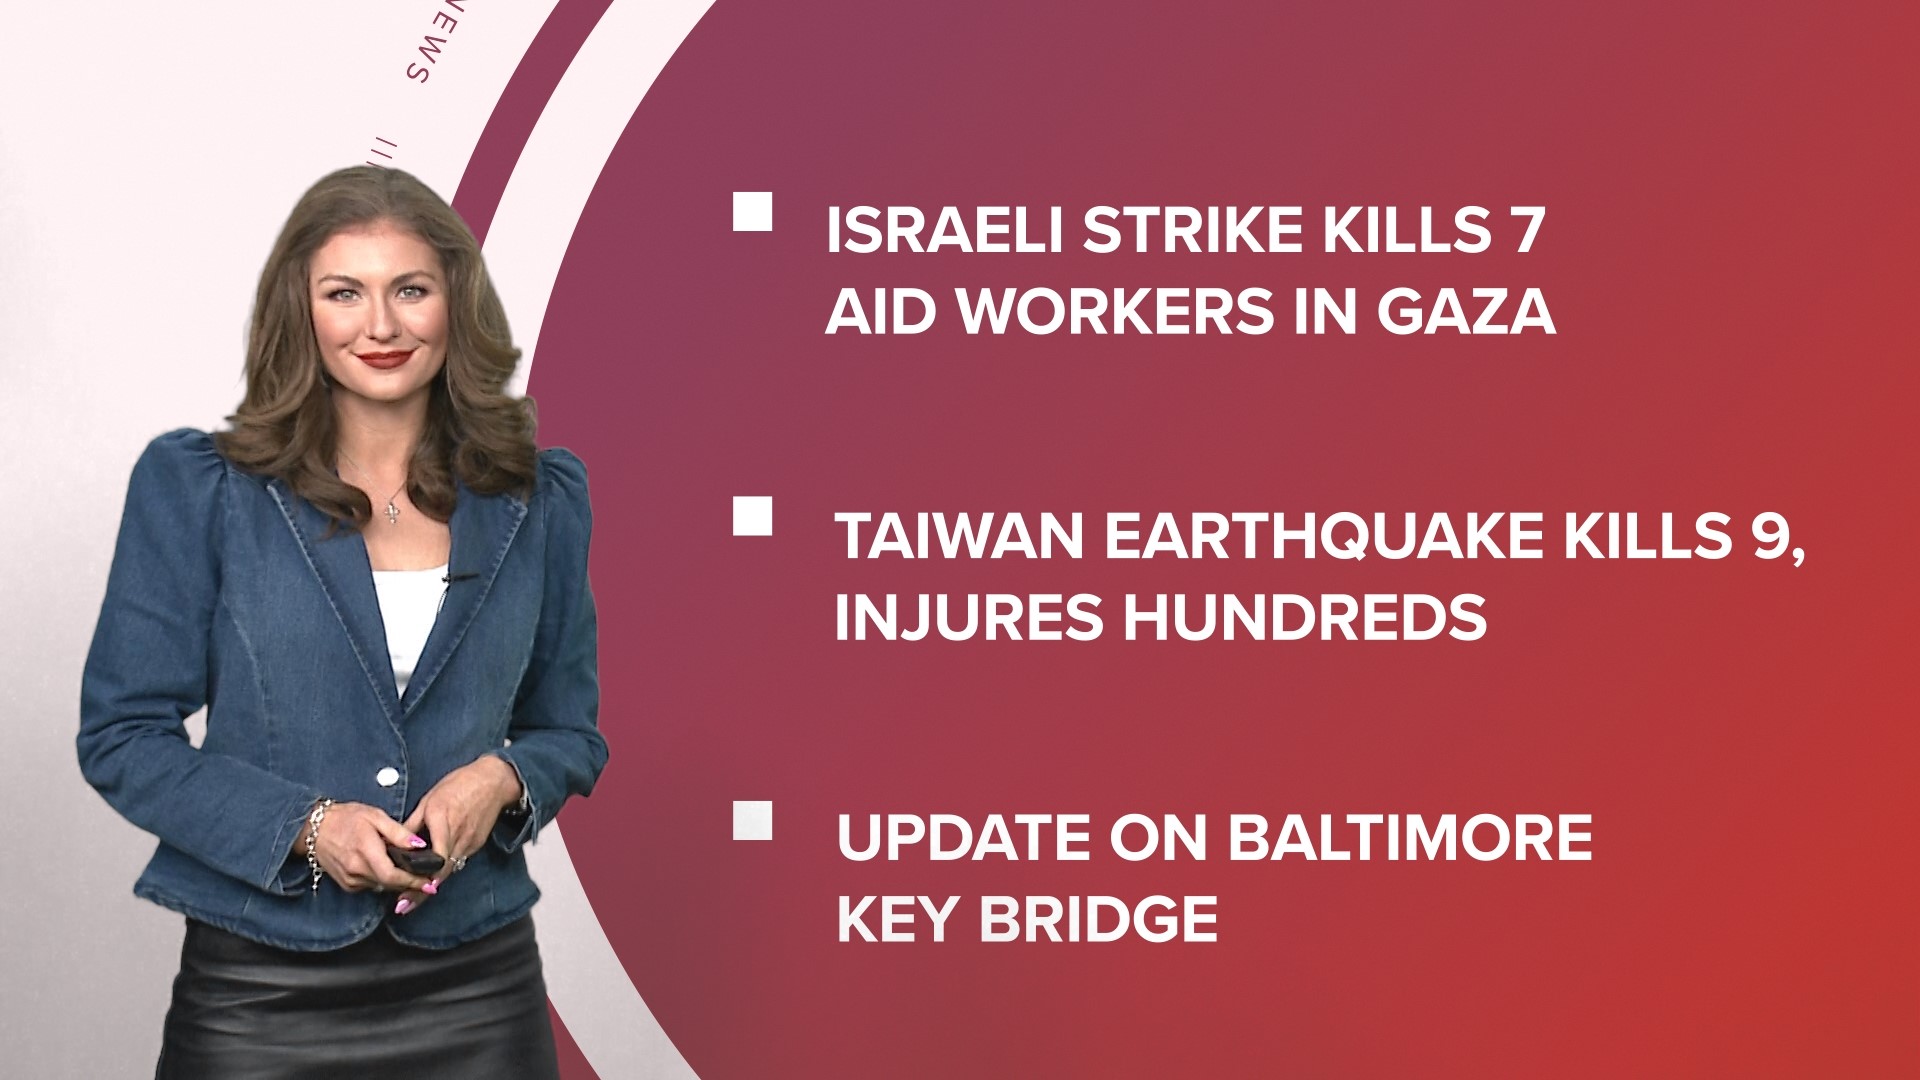 A look at what is happening in the news from aid workers killed in Israeli strike to a deadly quake in Taiwan and sonar images from Baltimore bridge collapse.